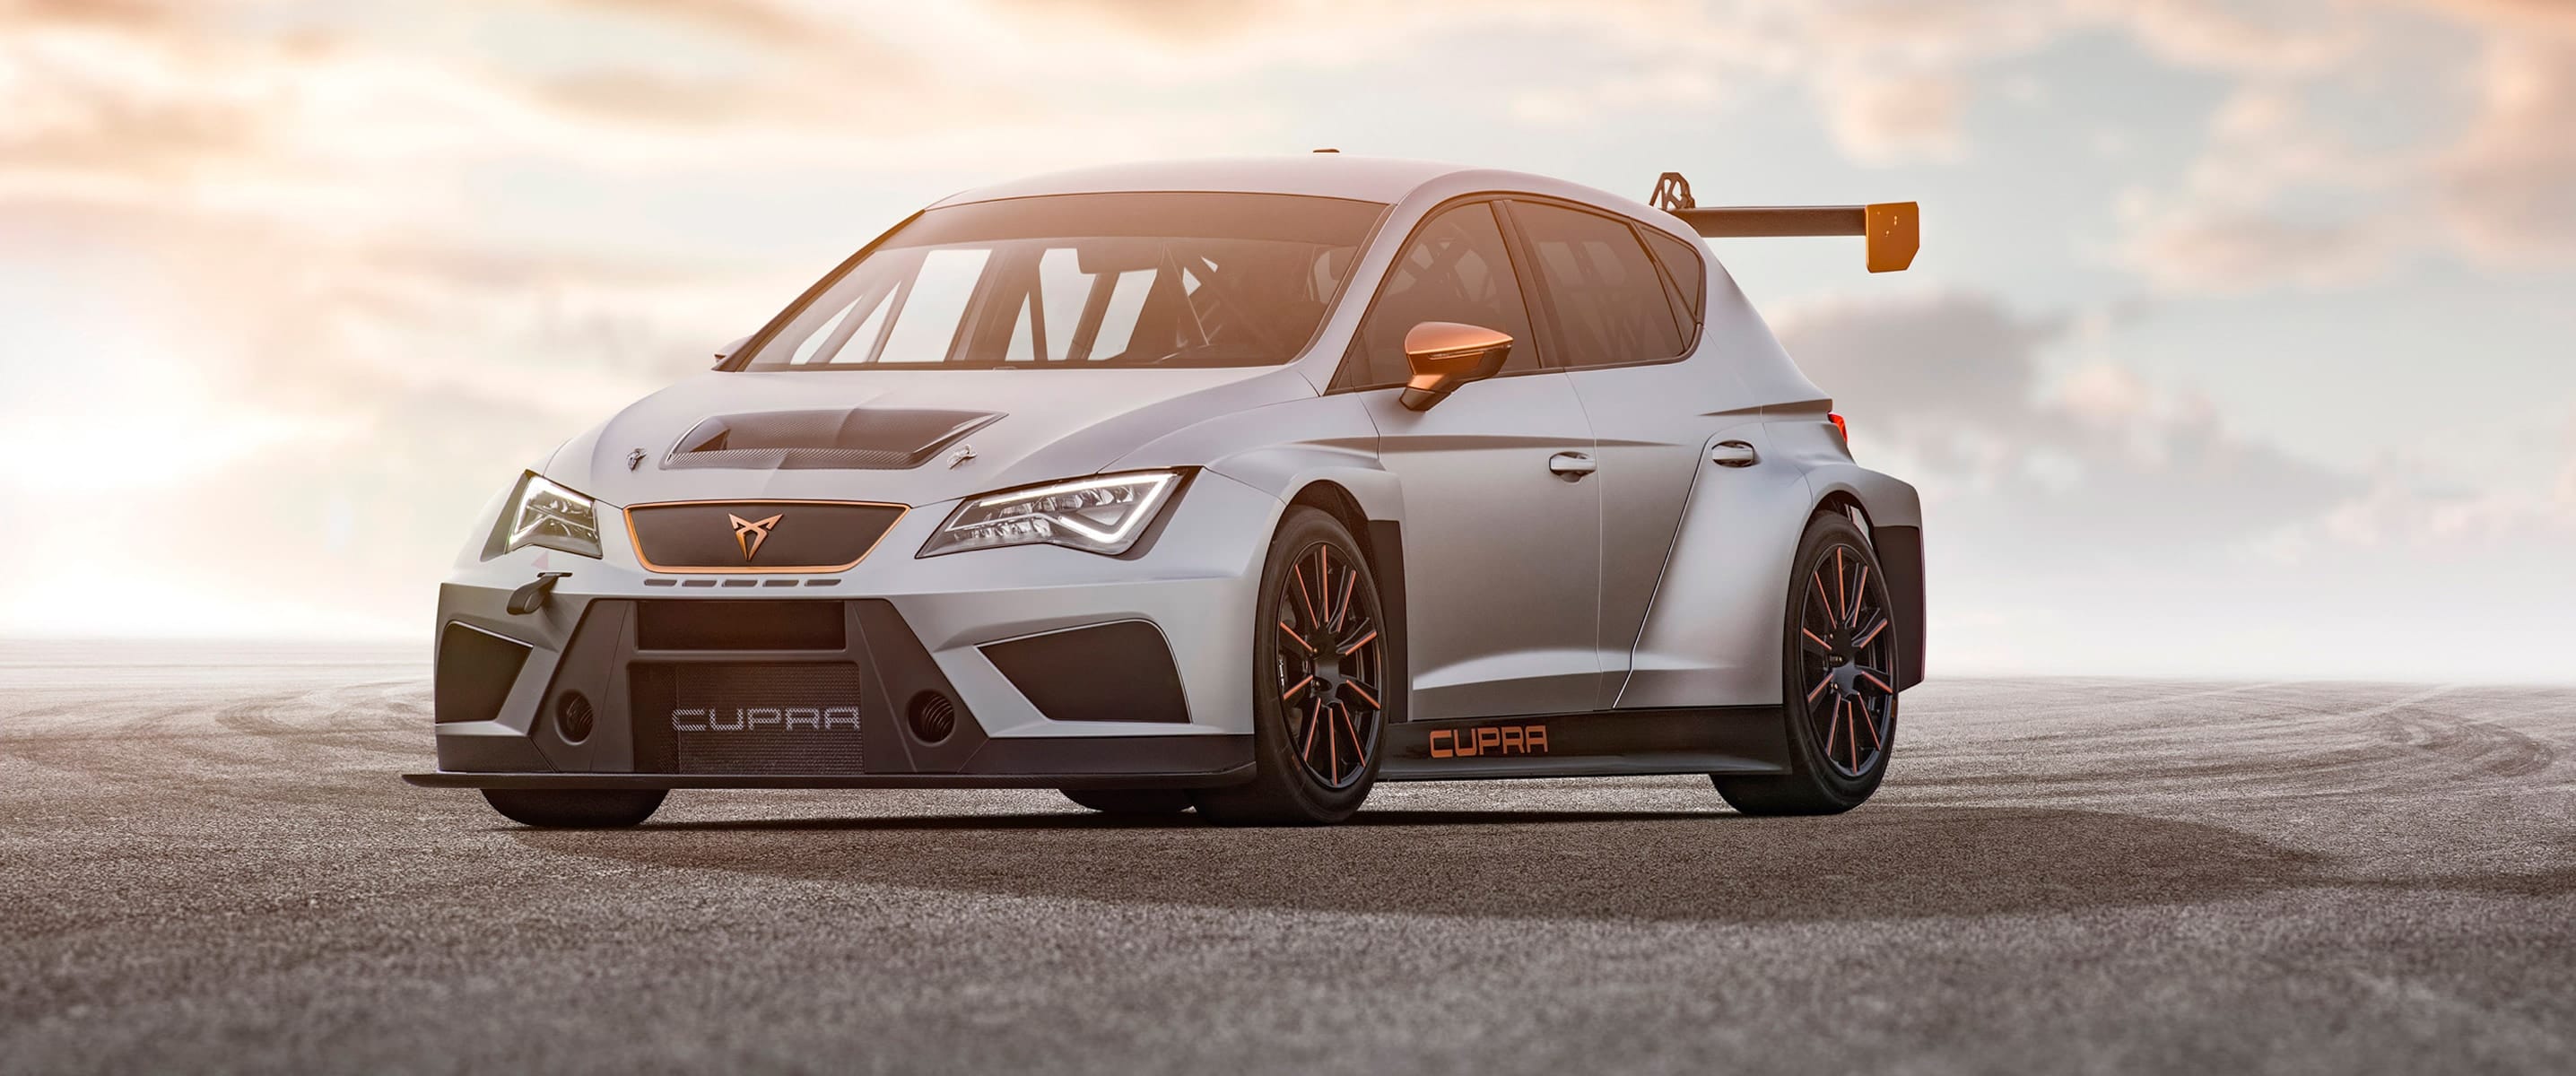 The Cupra TCR front and side view